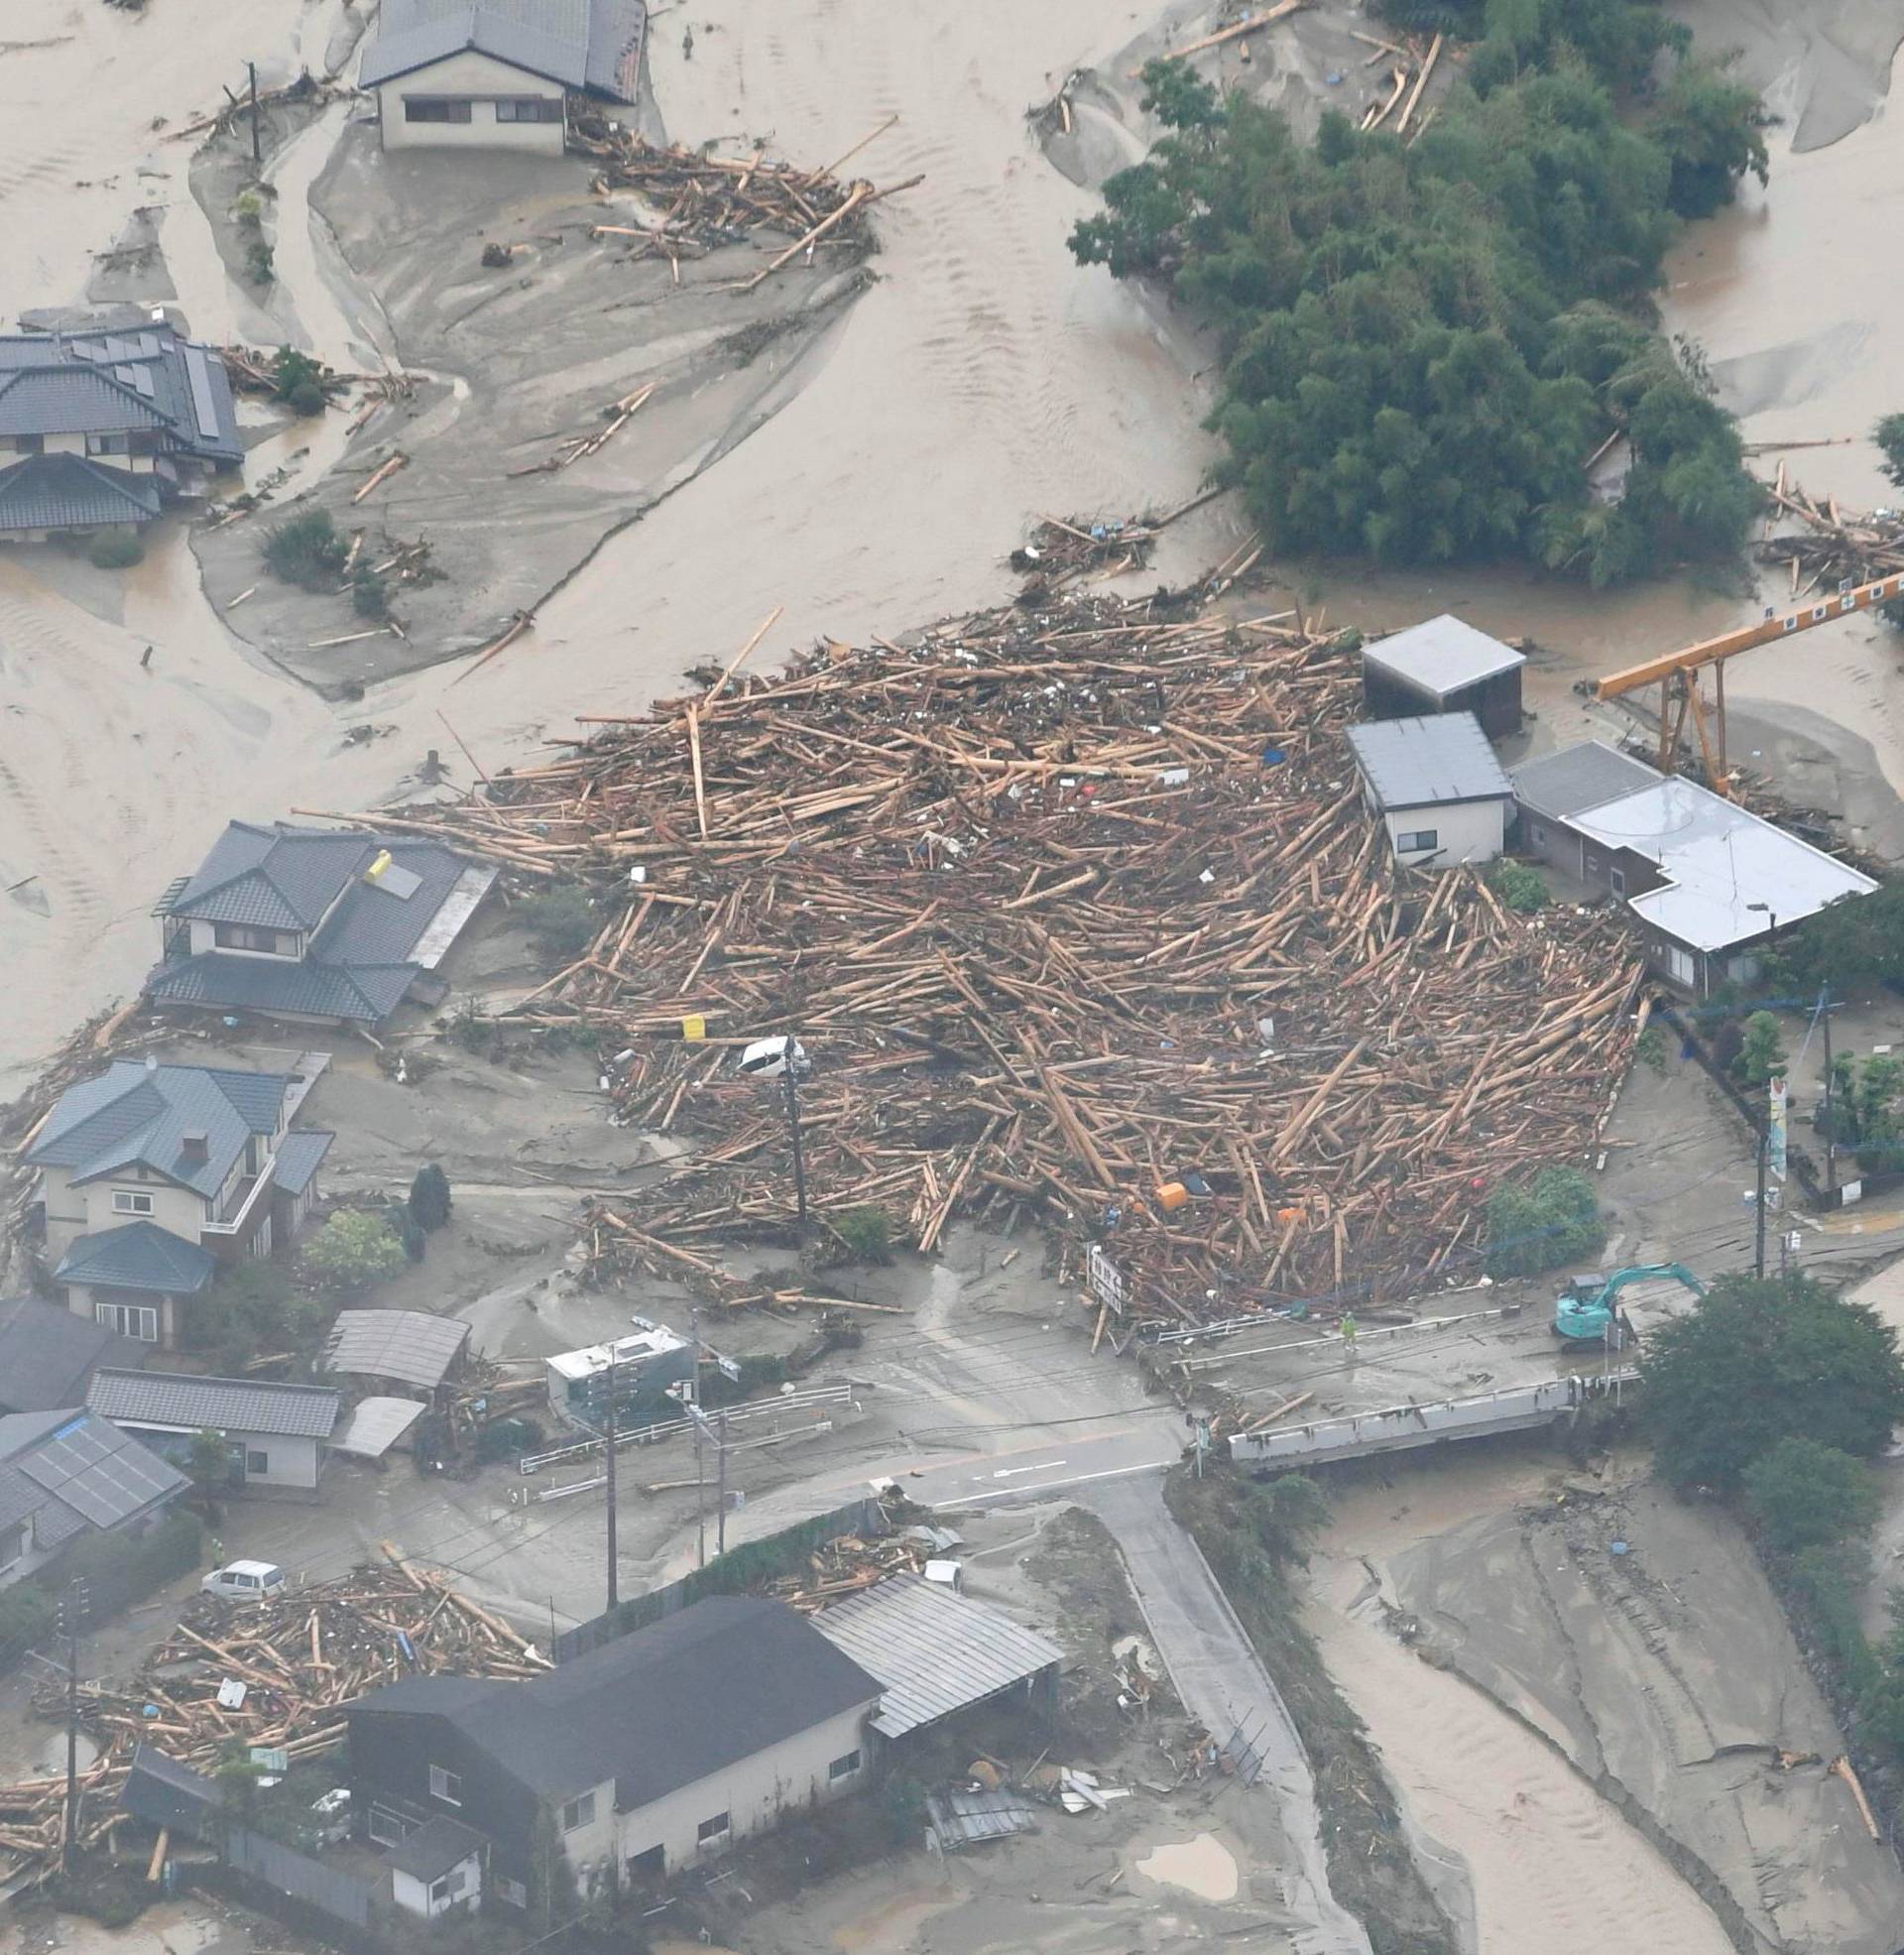 Houses damaged by swollen river after heavy rain hit the area, are seen in Asakura